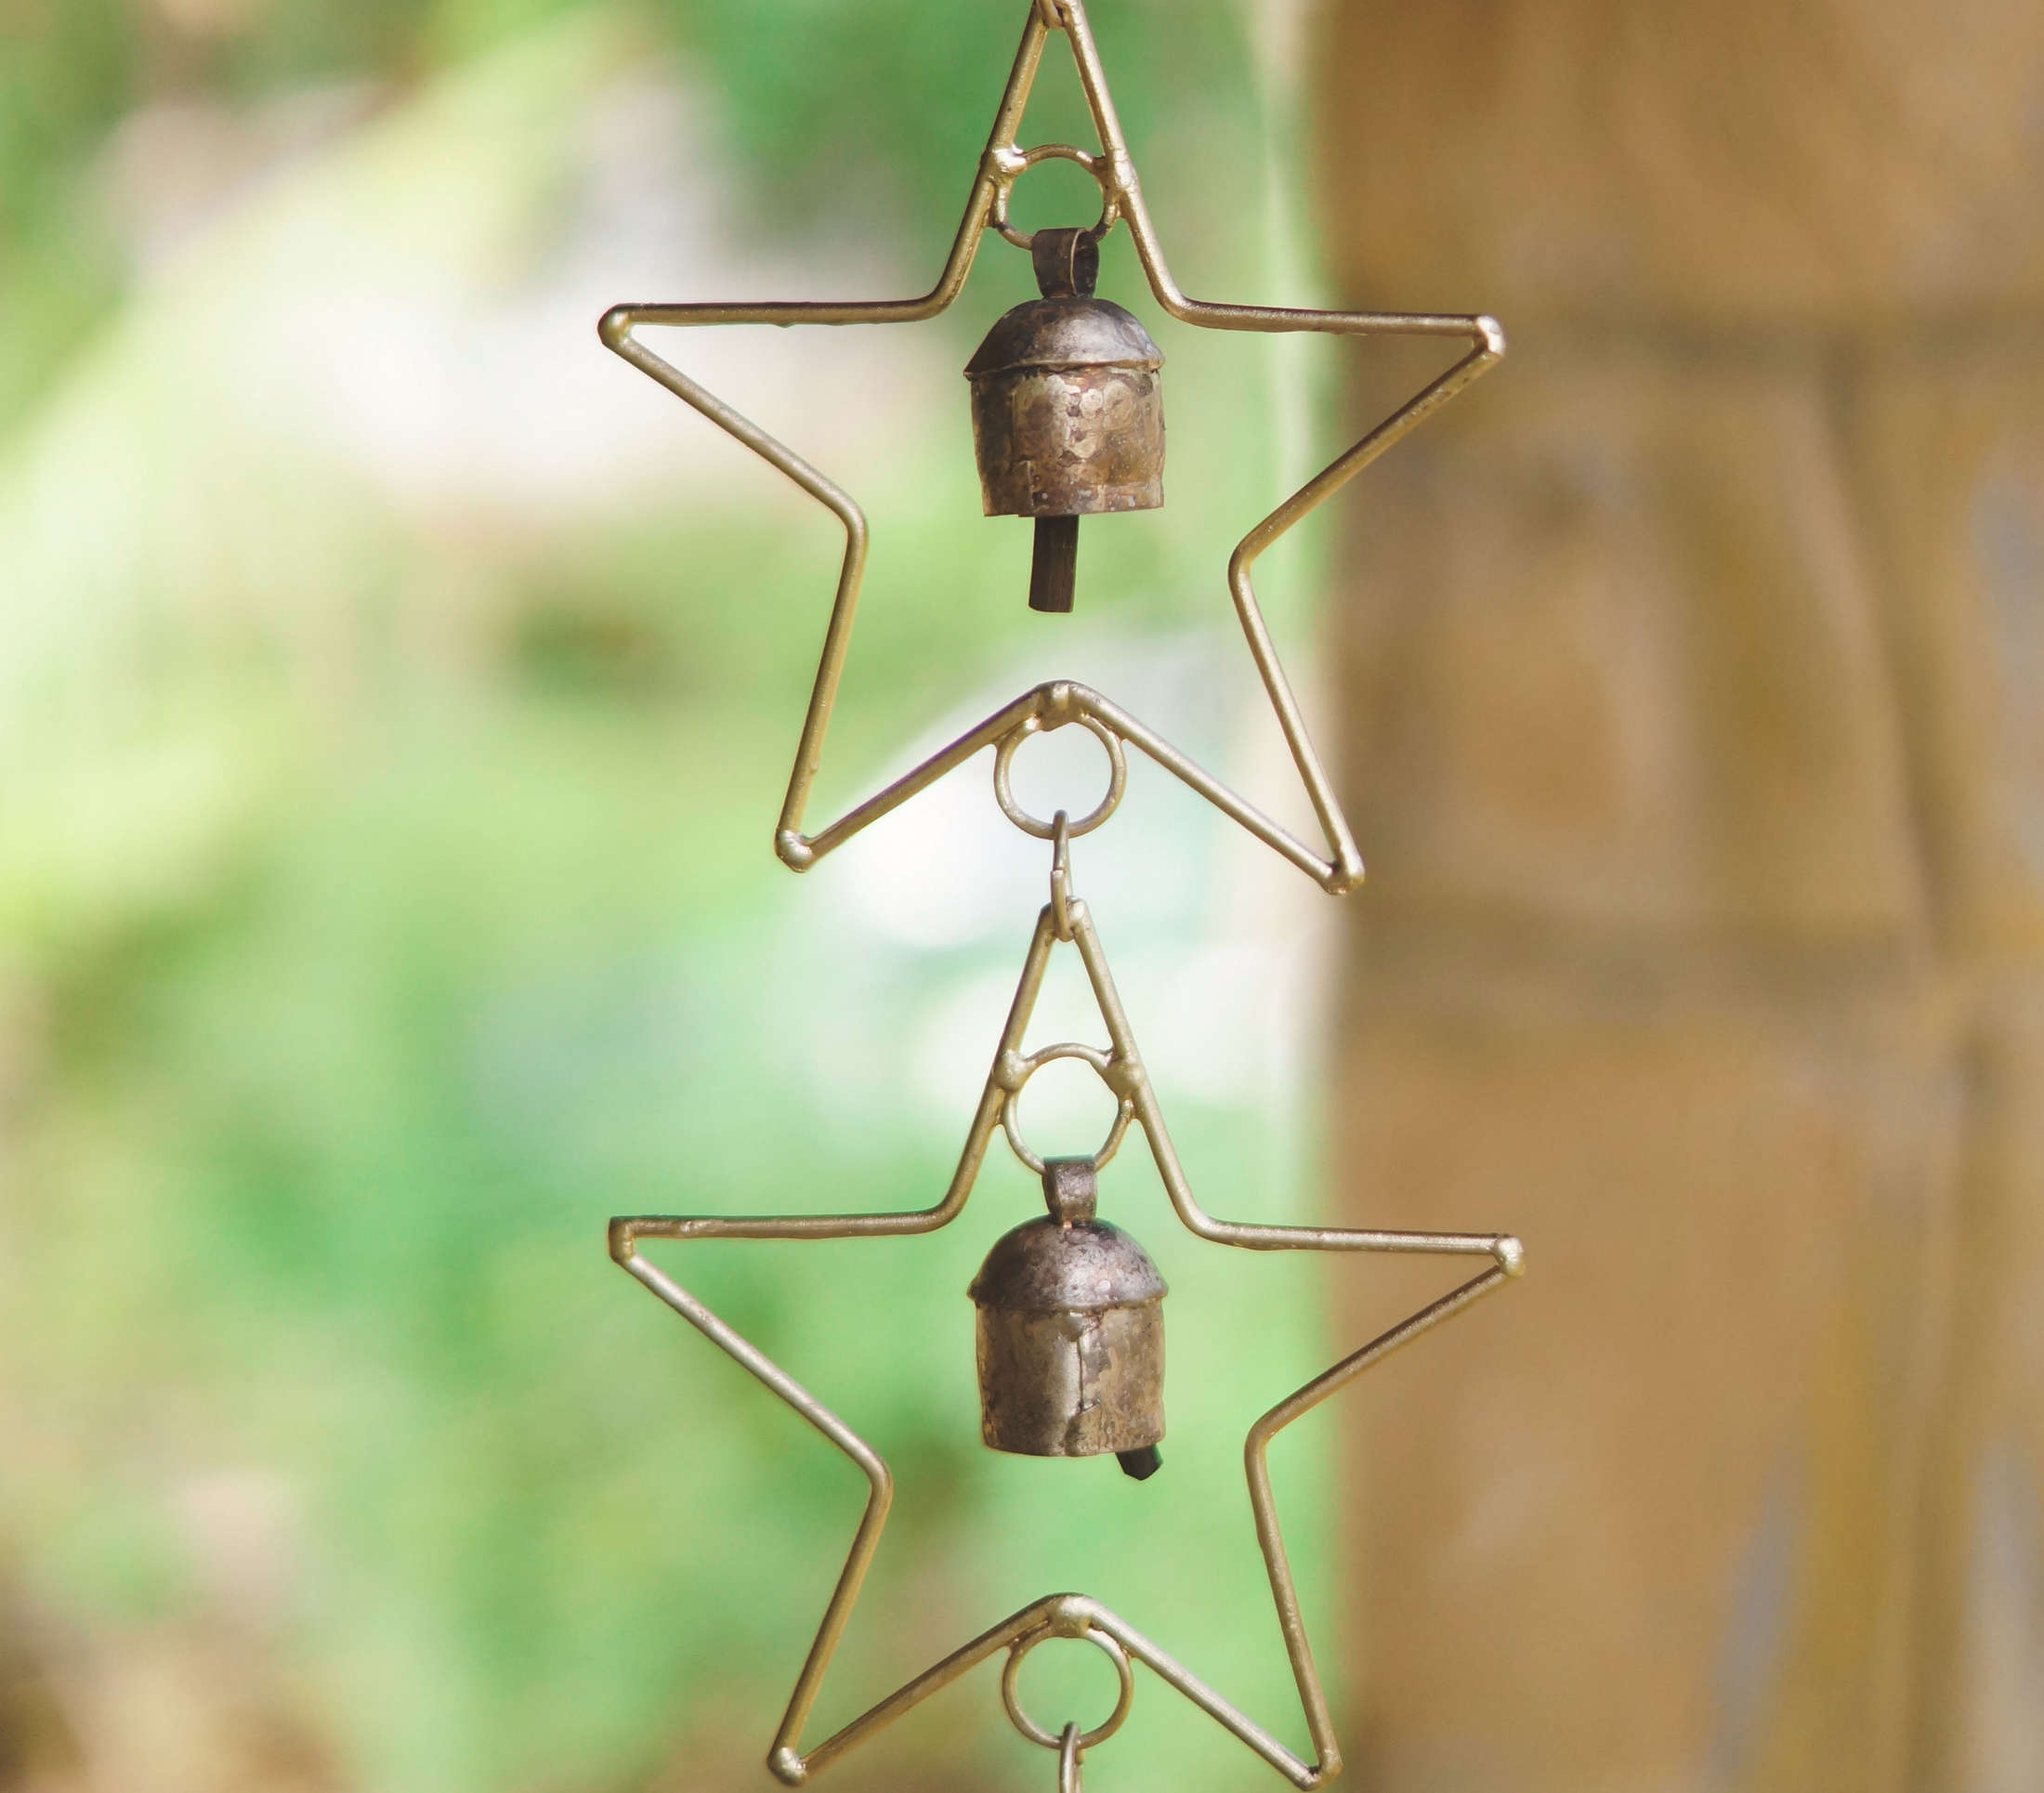 Recycled iron & copper coated kutch chime